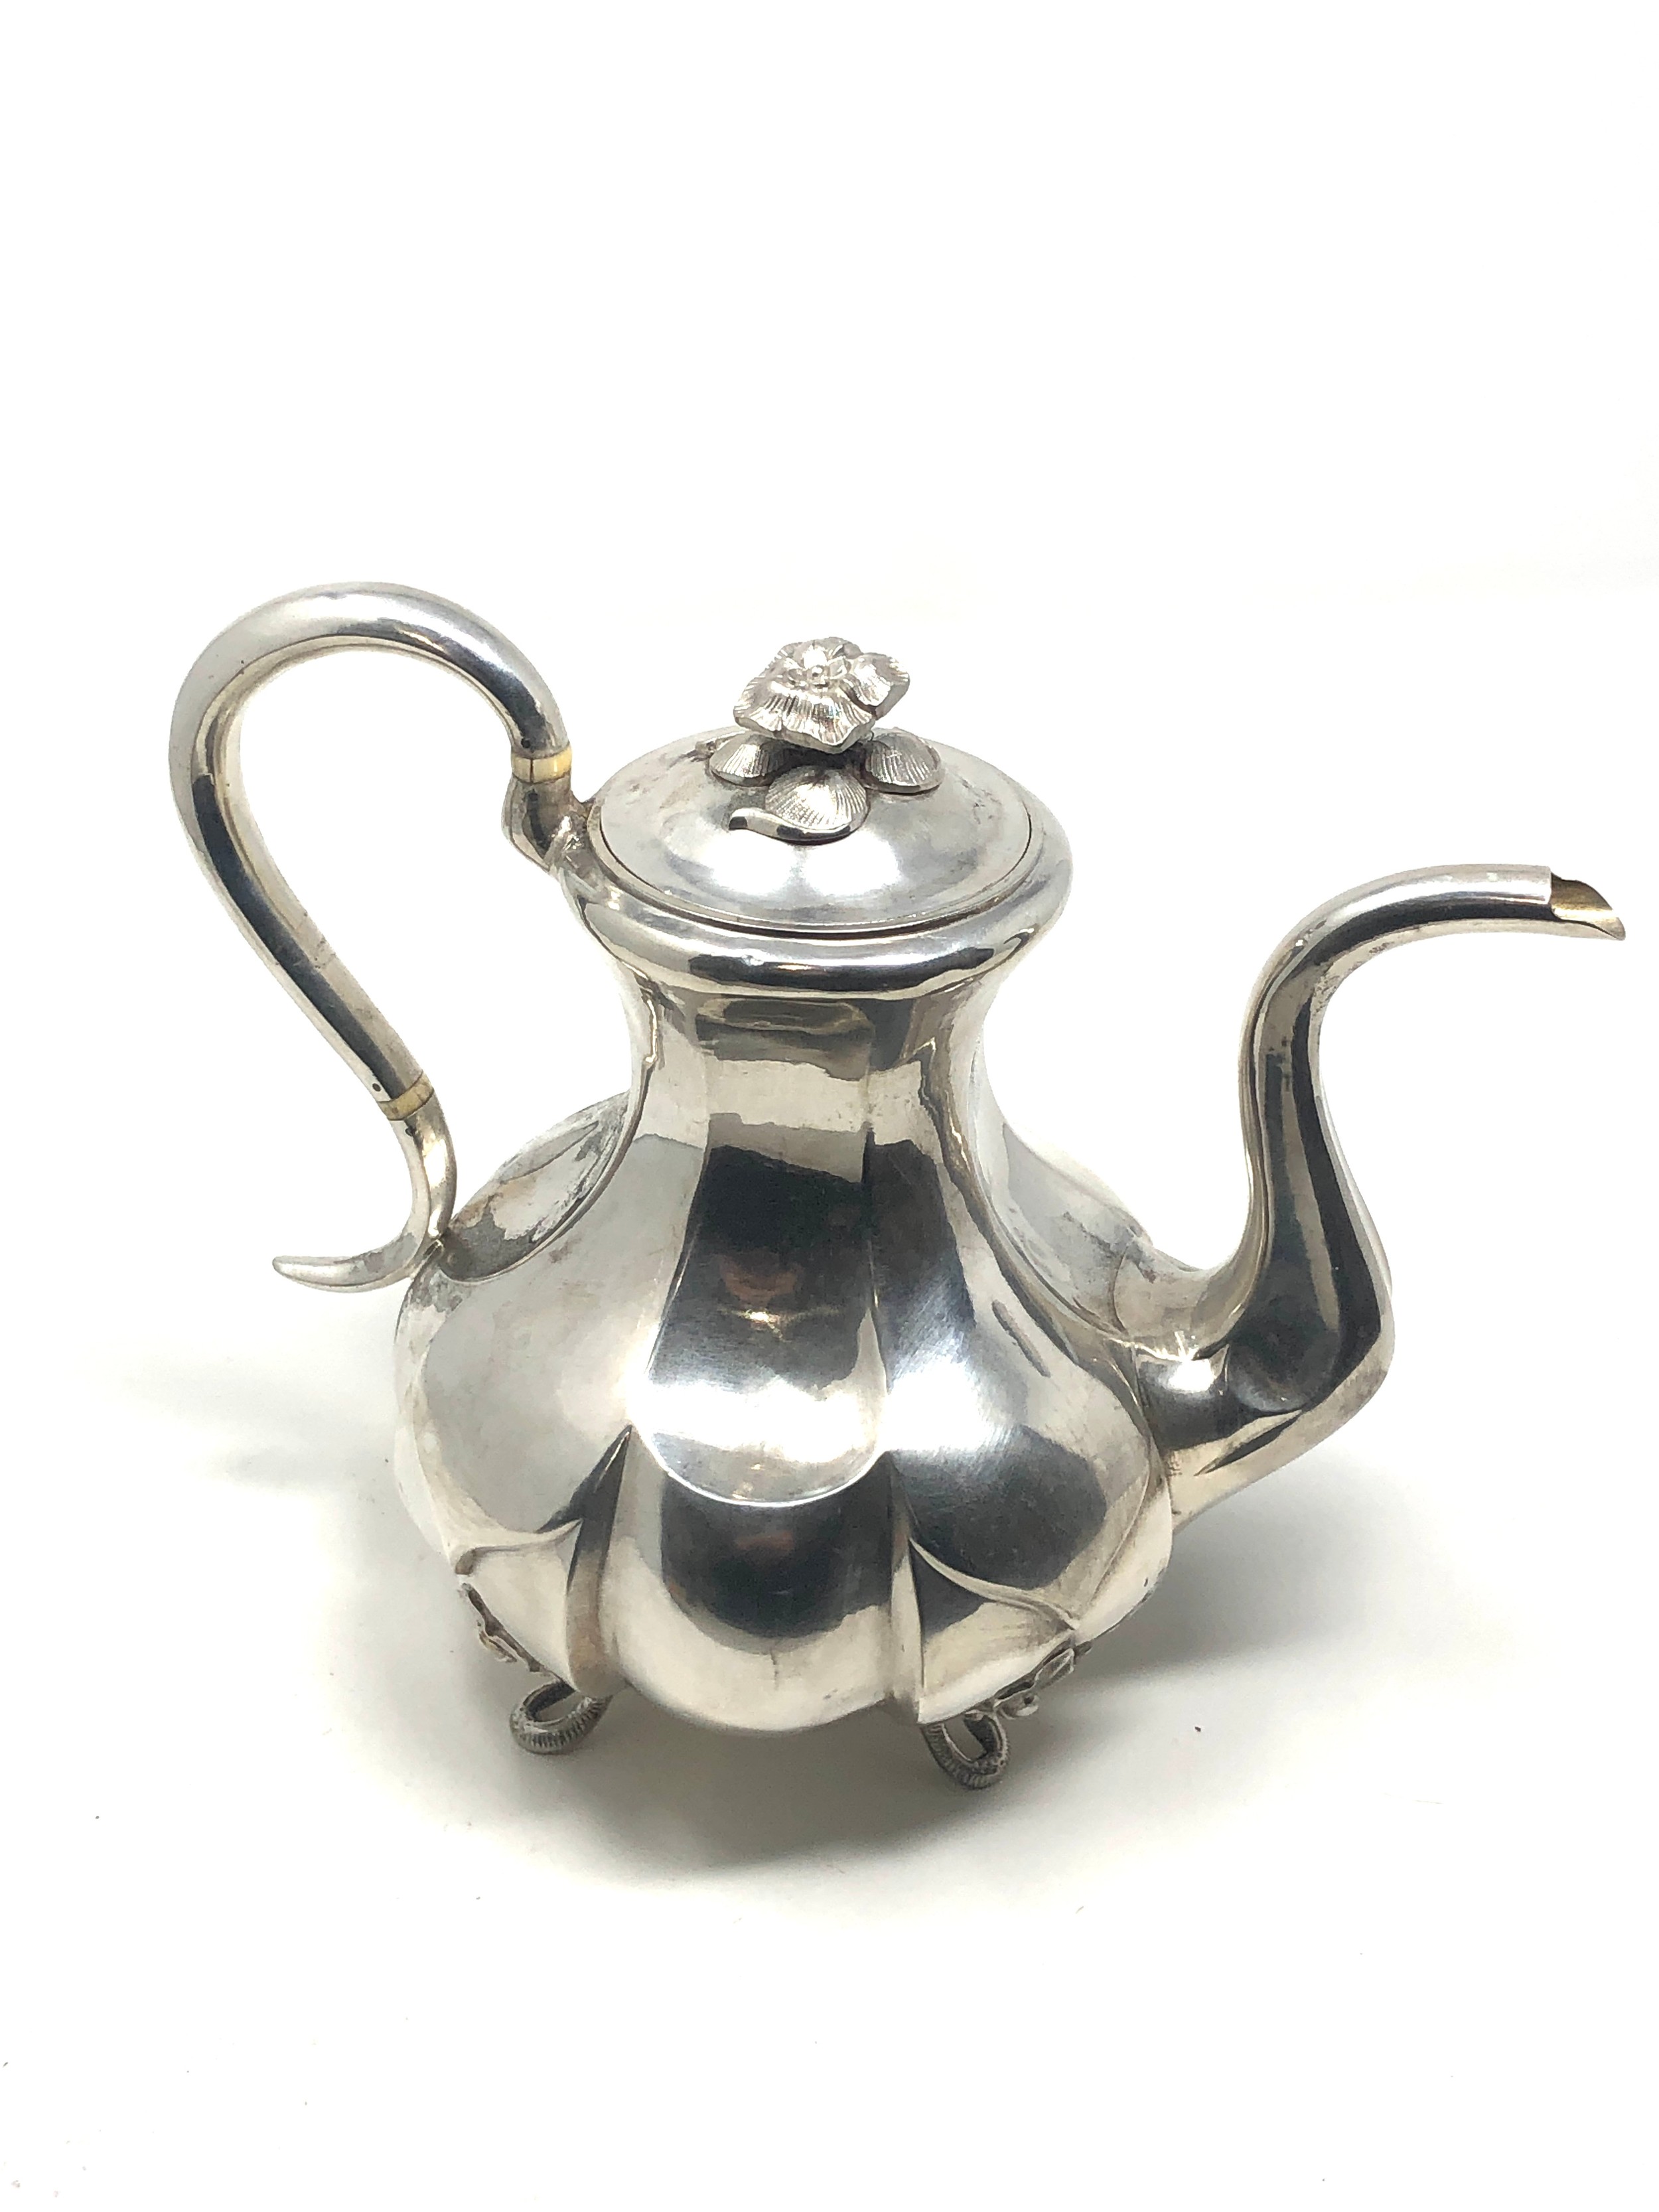 Antique Russian silver teapot weight 695g - Image 2 of 6